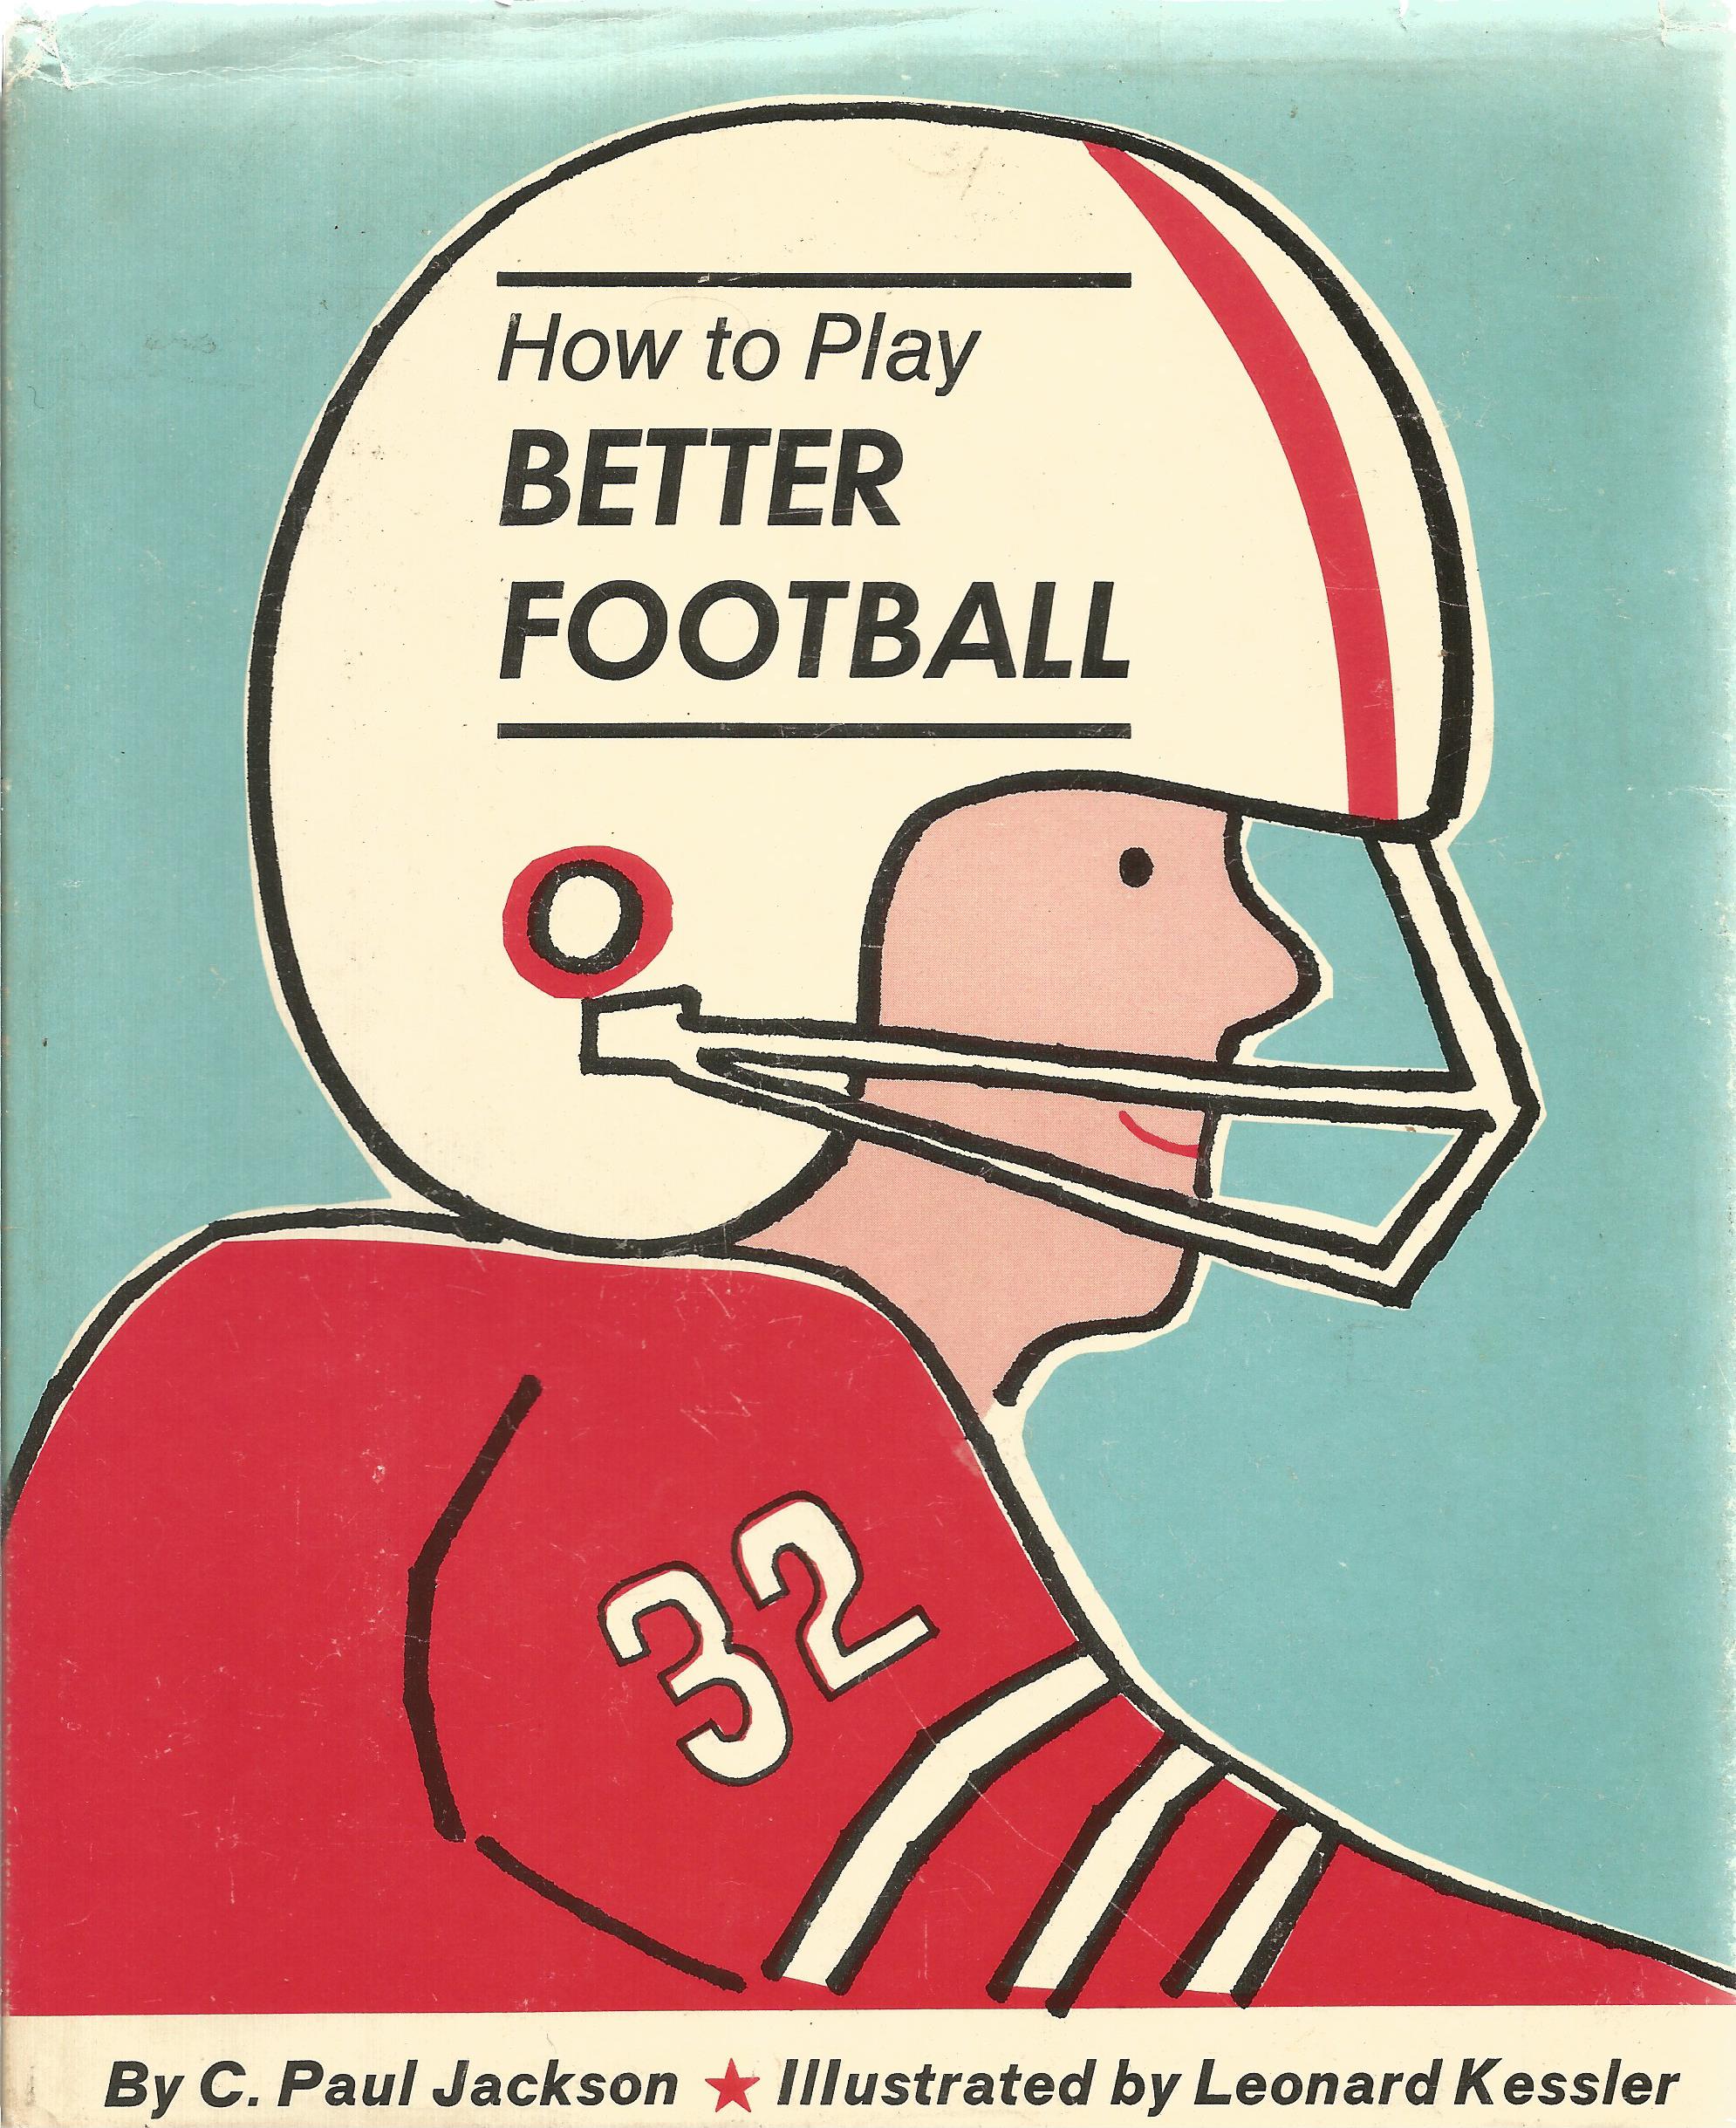 How to Play Better Football by C Paul Jackson First Edition 1972 Hardback Book published by Thomas Y